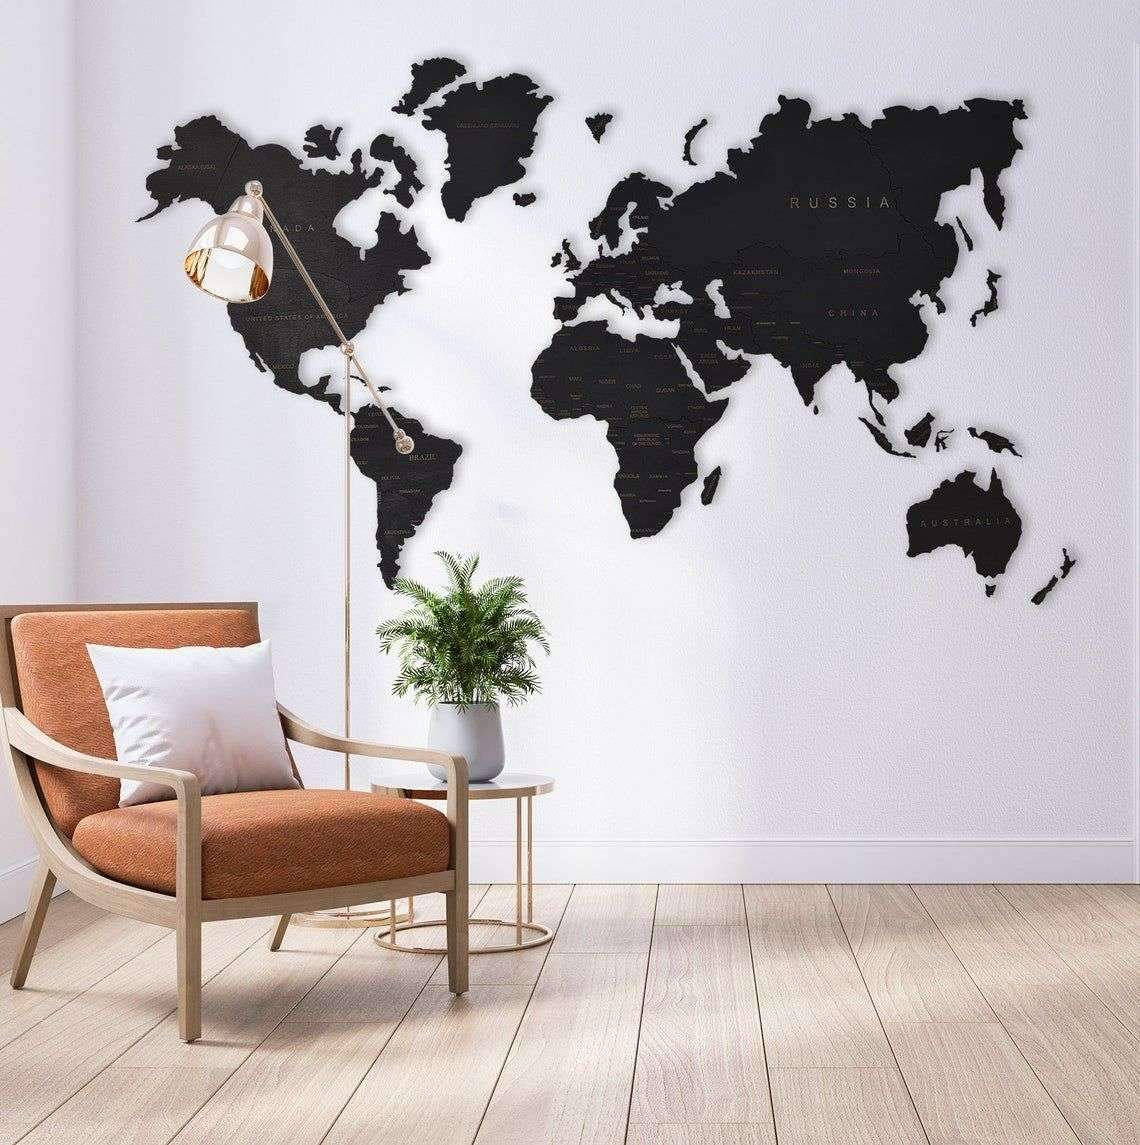 Wooden World Map – M – 39×24 inches (100×60 cm) / STANDARD